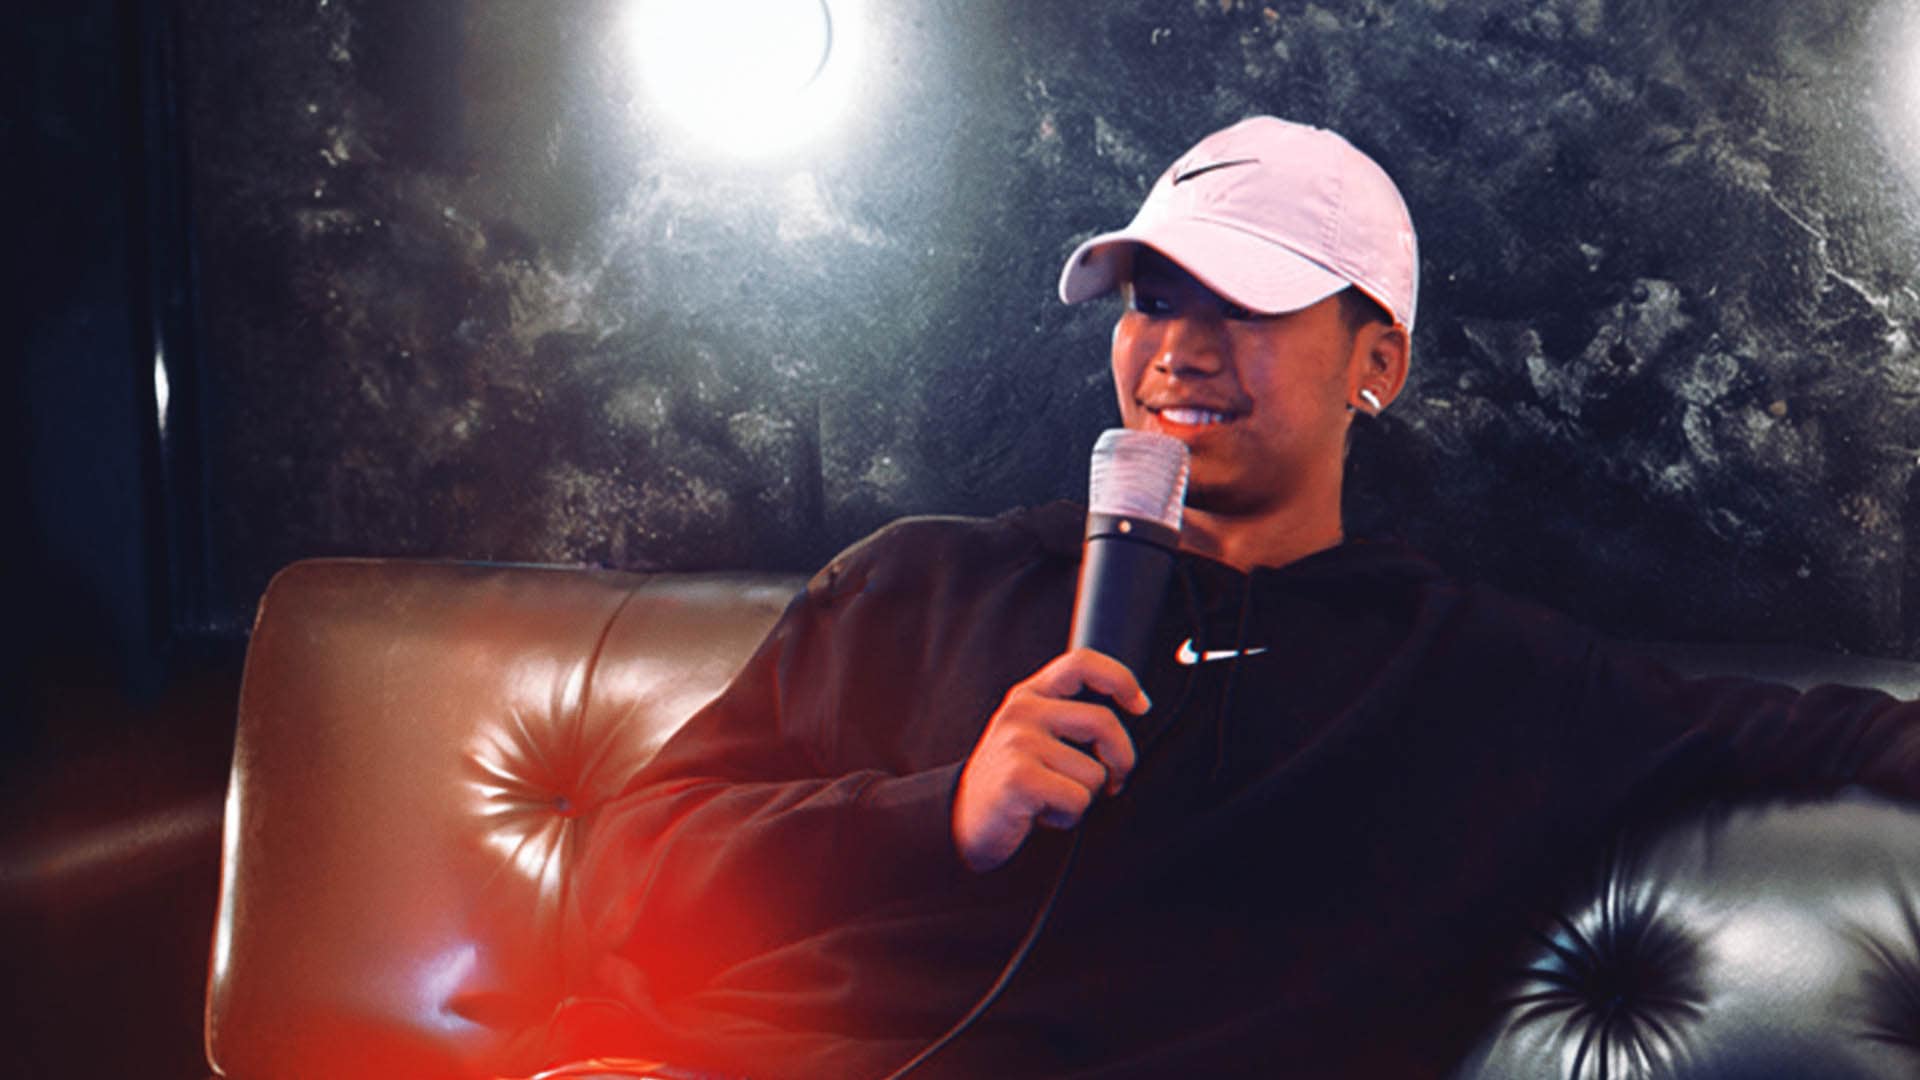 Smiling R&B singer Phurpax holding a microphone, relaxing on a couch.